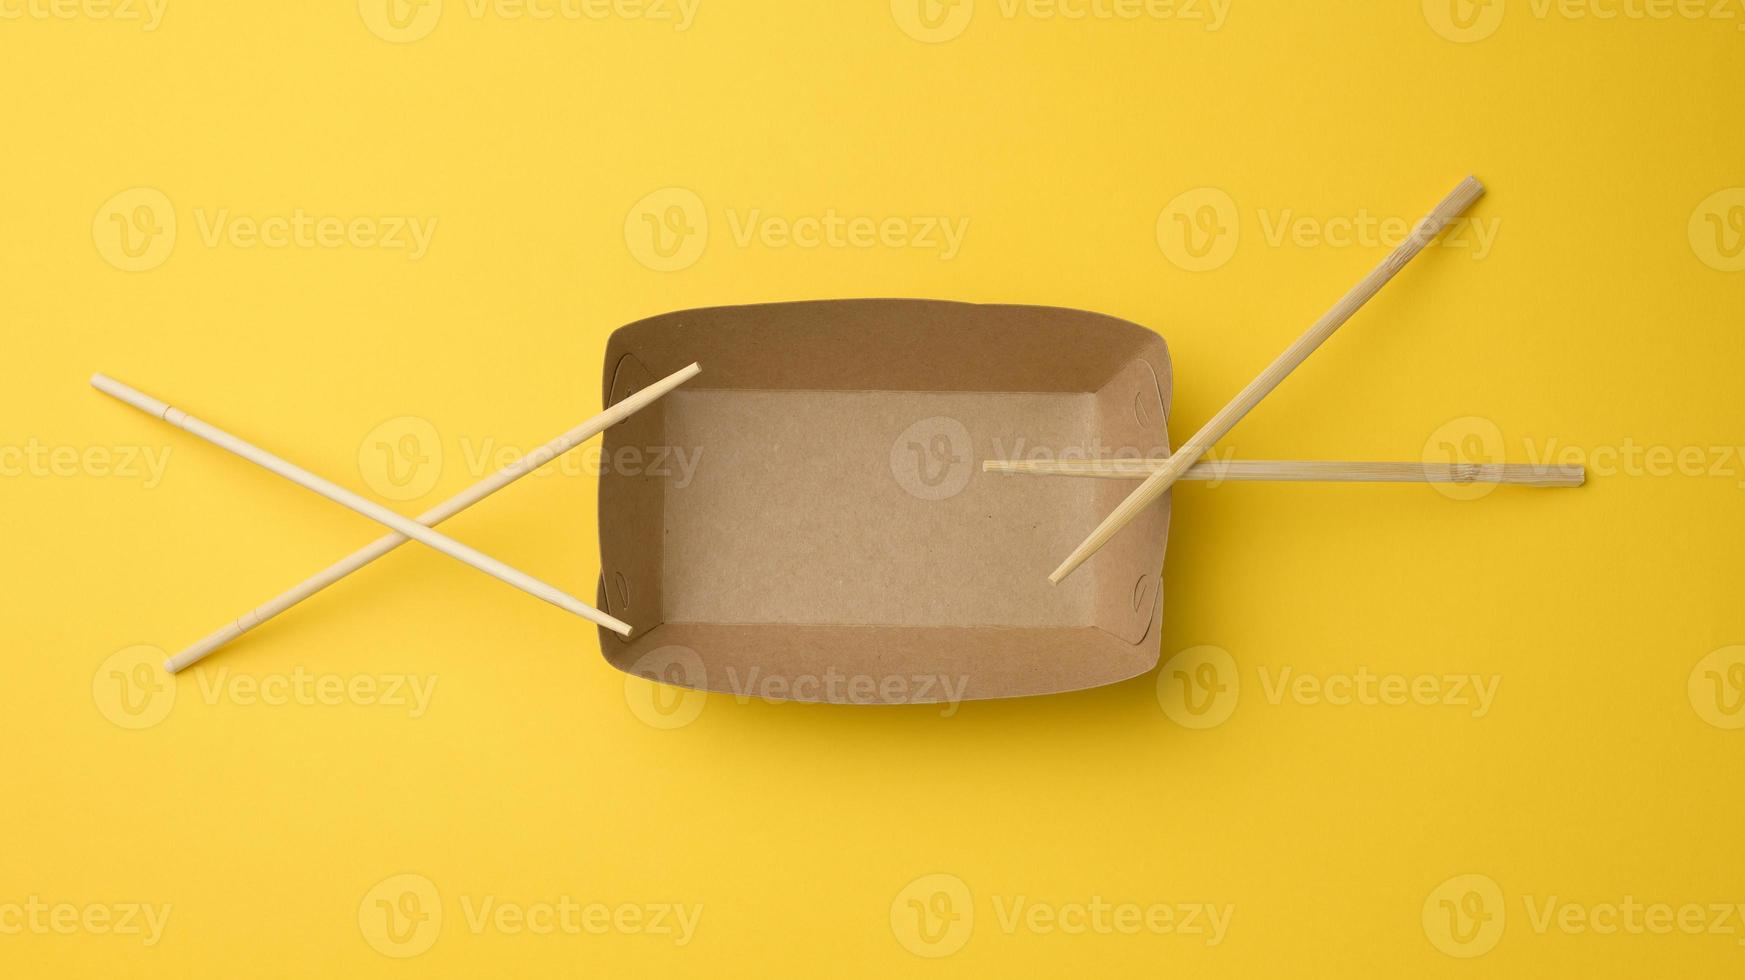 empty brown paper plate and wooden chopsticks on a yellow background, top view. Disposable tableware photo